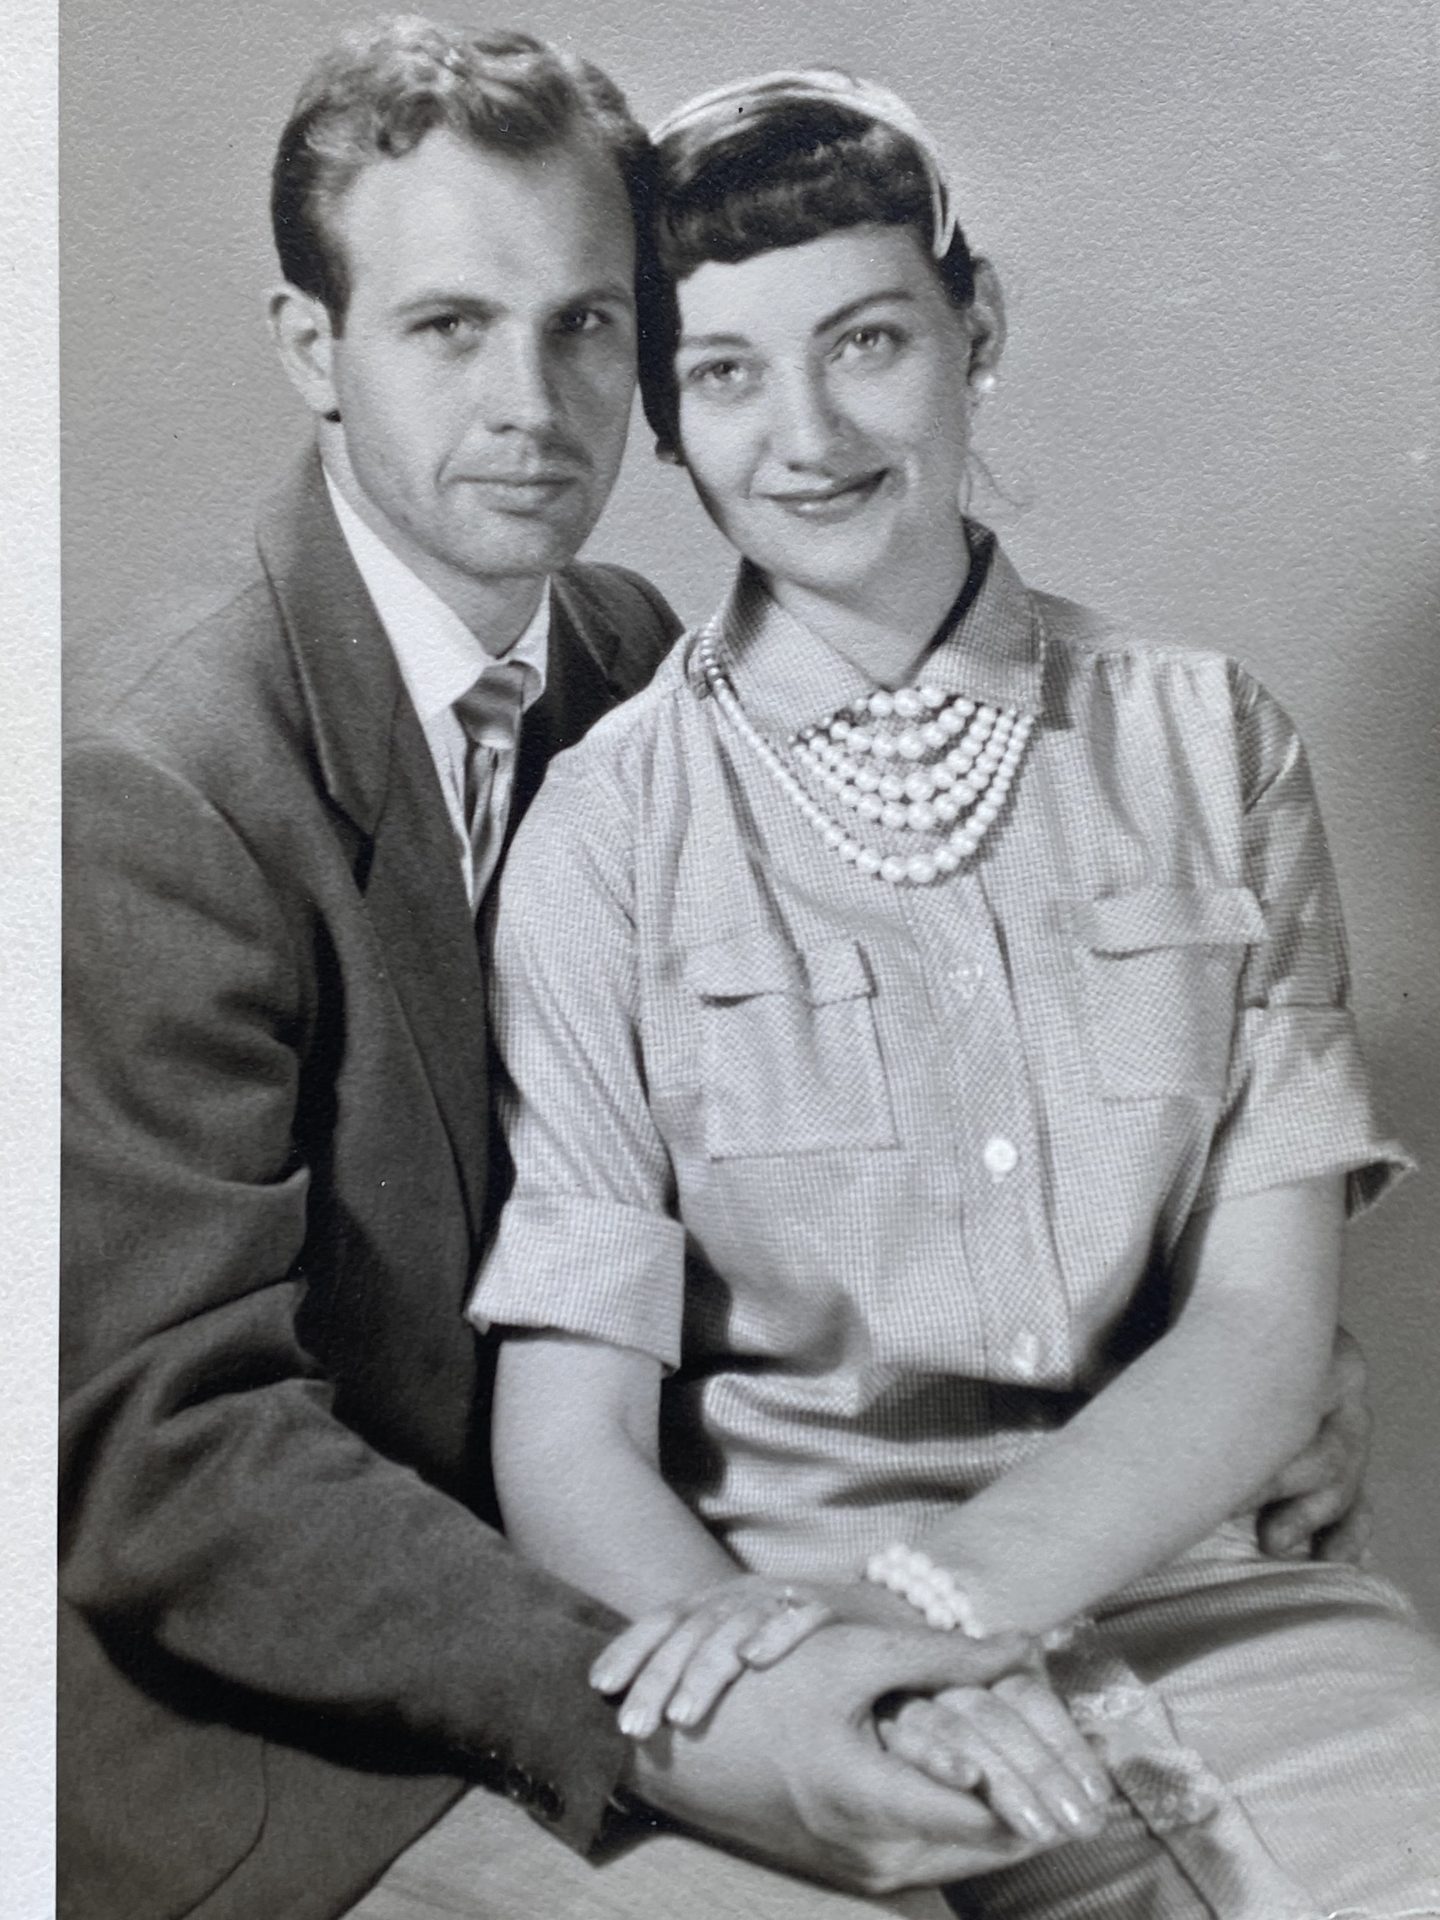 Dad as a young Newlywed